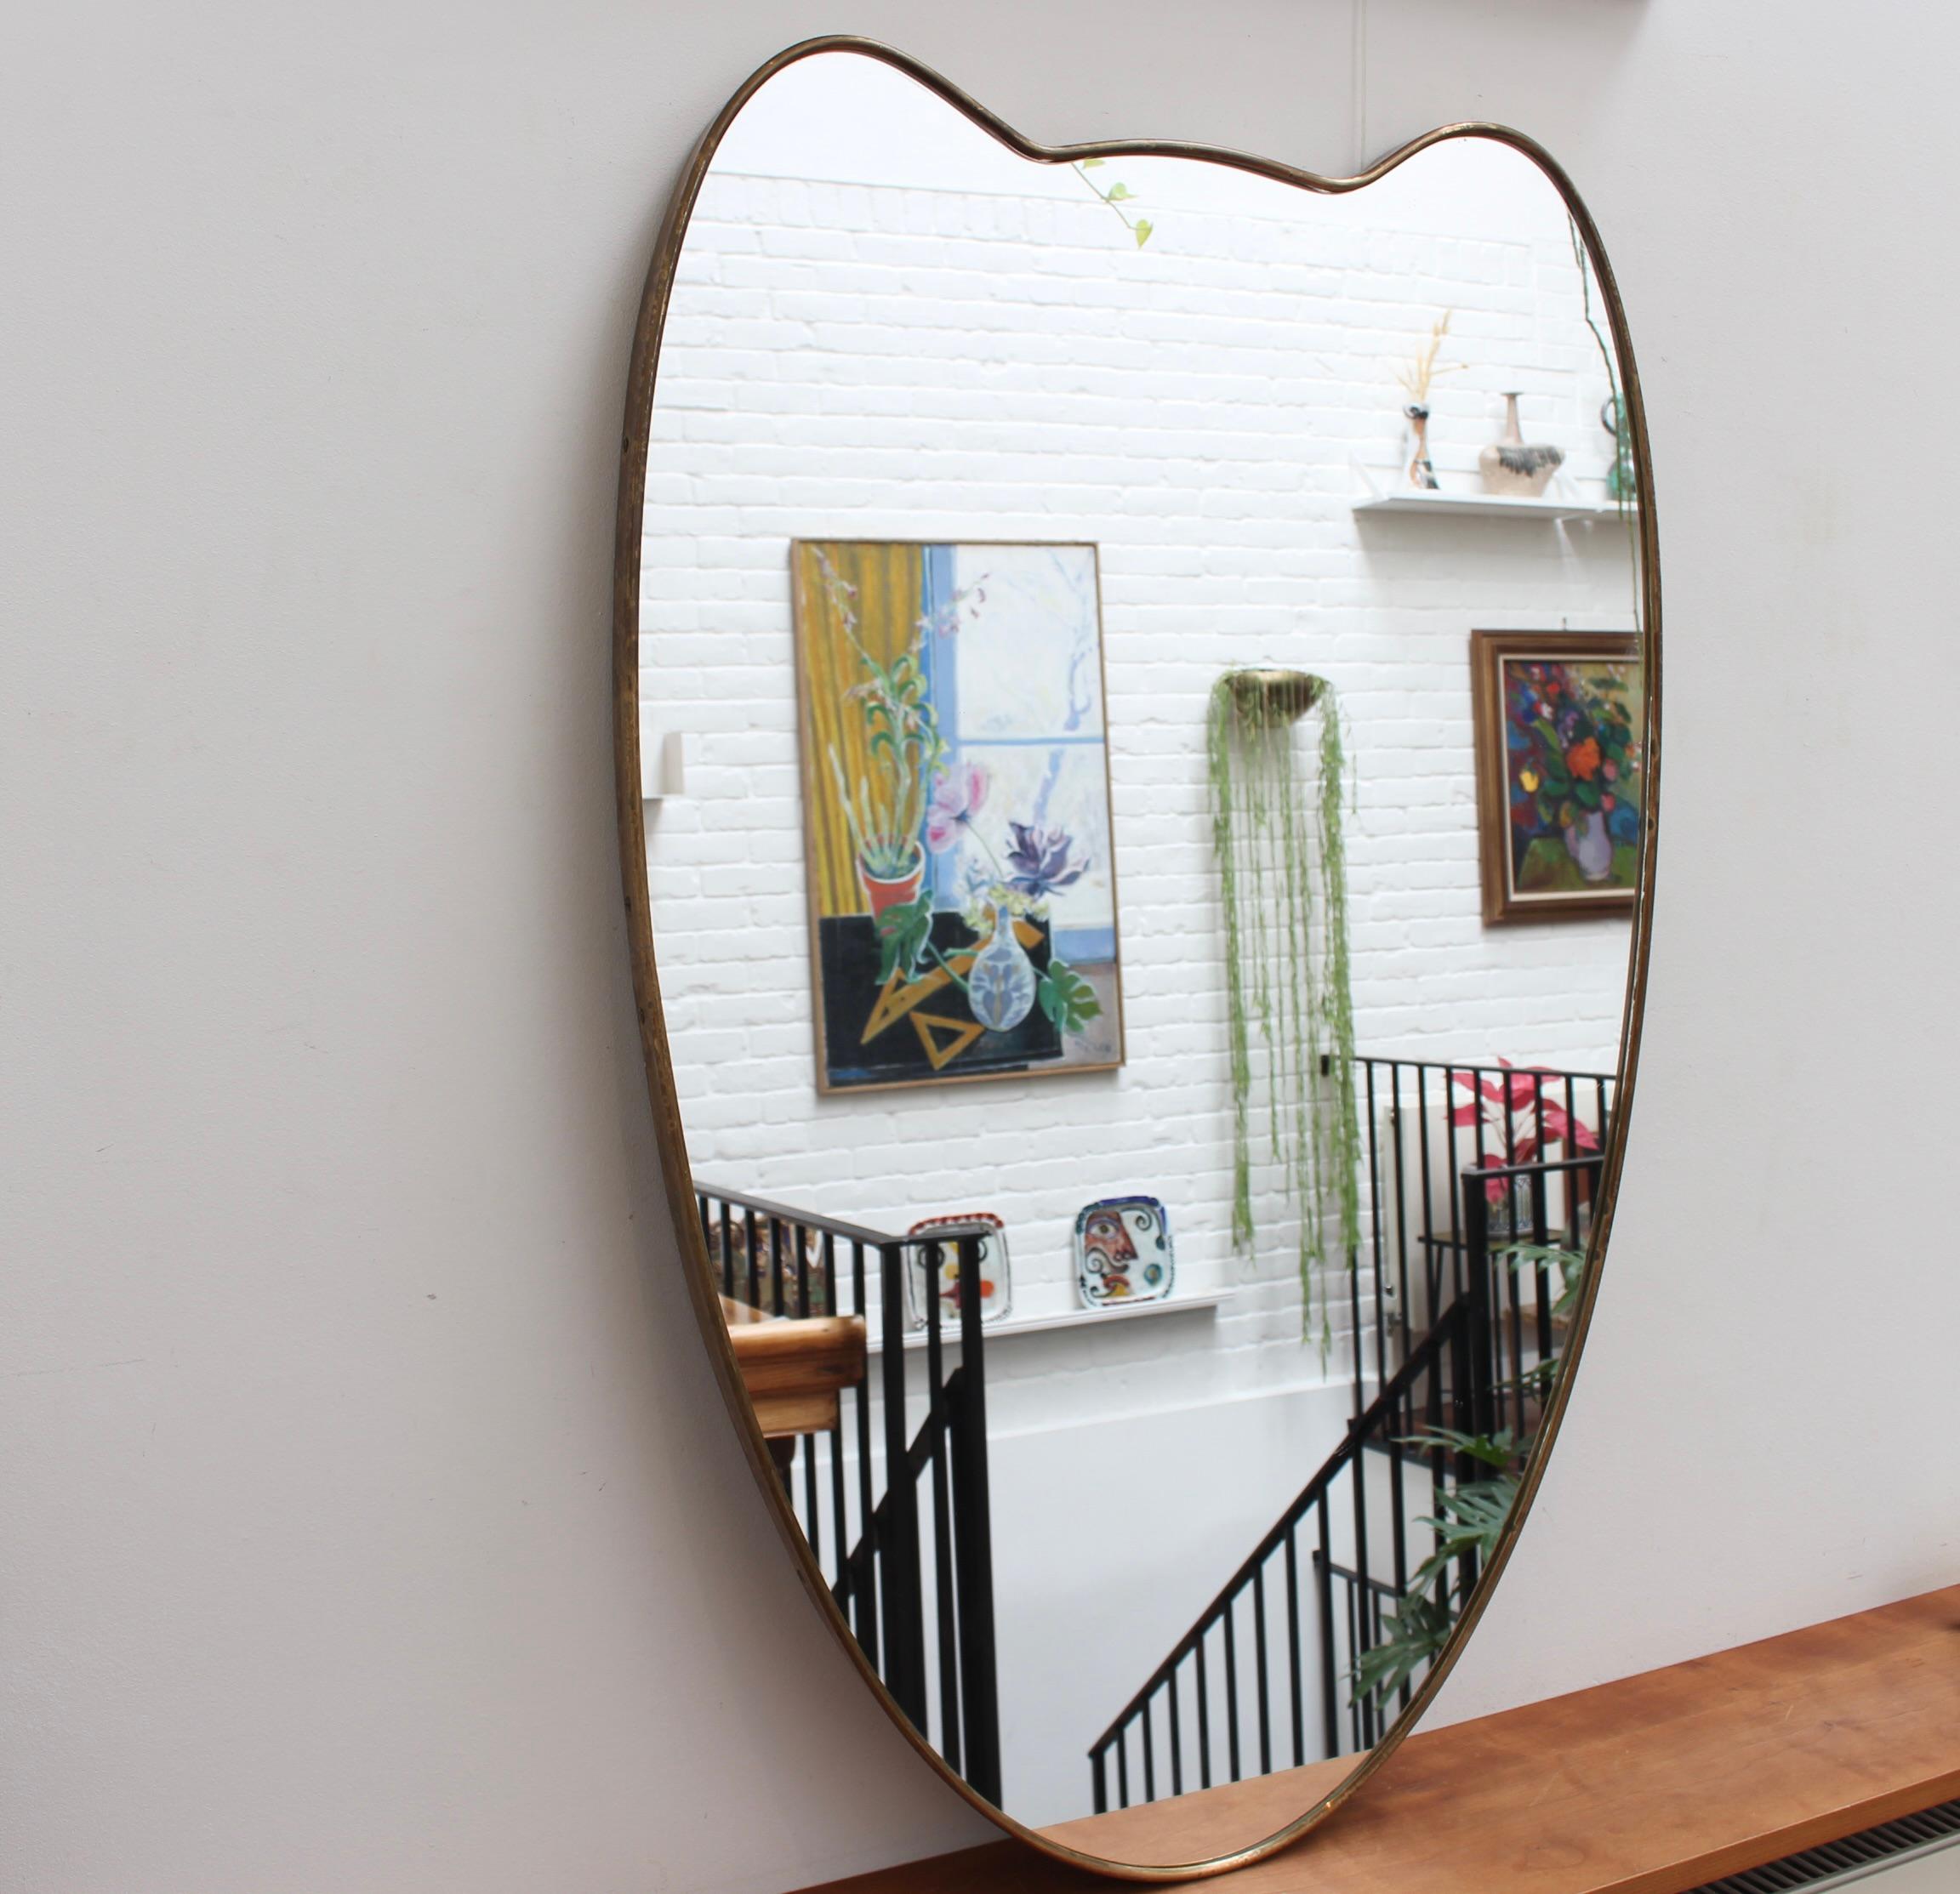 Mid-century Italian wall mirror with brass frame (circa 1950s). The mirror is classically-shaped and distinctive in a Modern style. It is in good overall condition. A beautiful patina has developed on the brass frame as in the photos - this one has